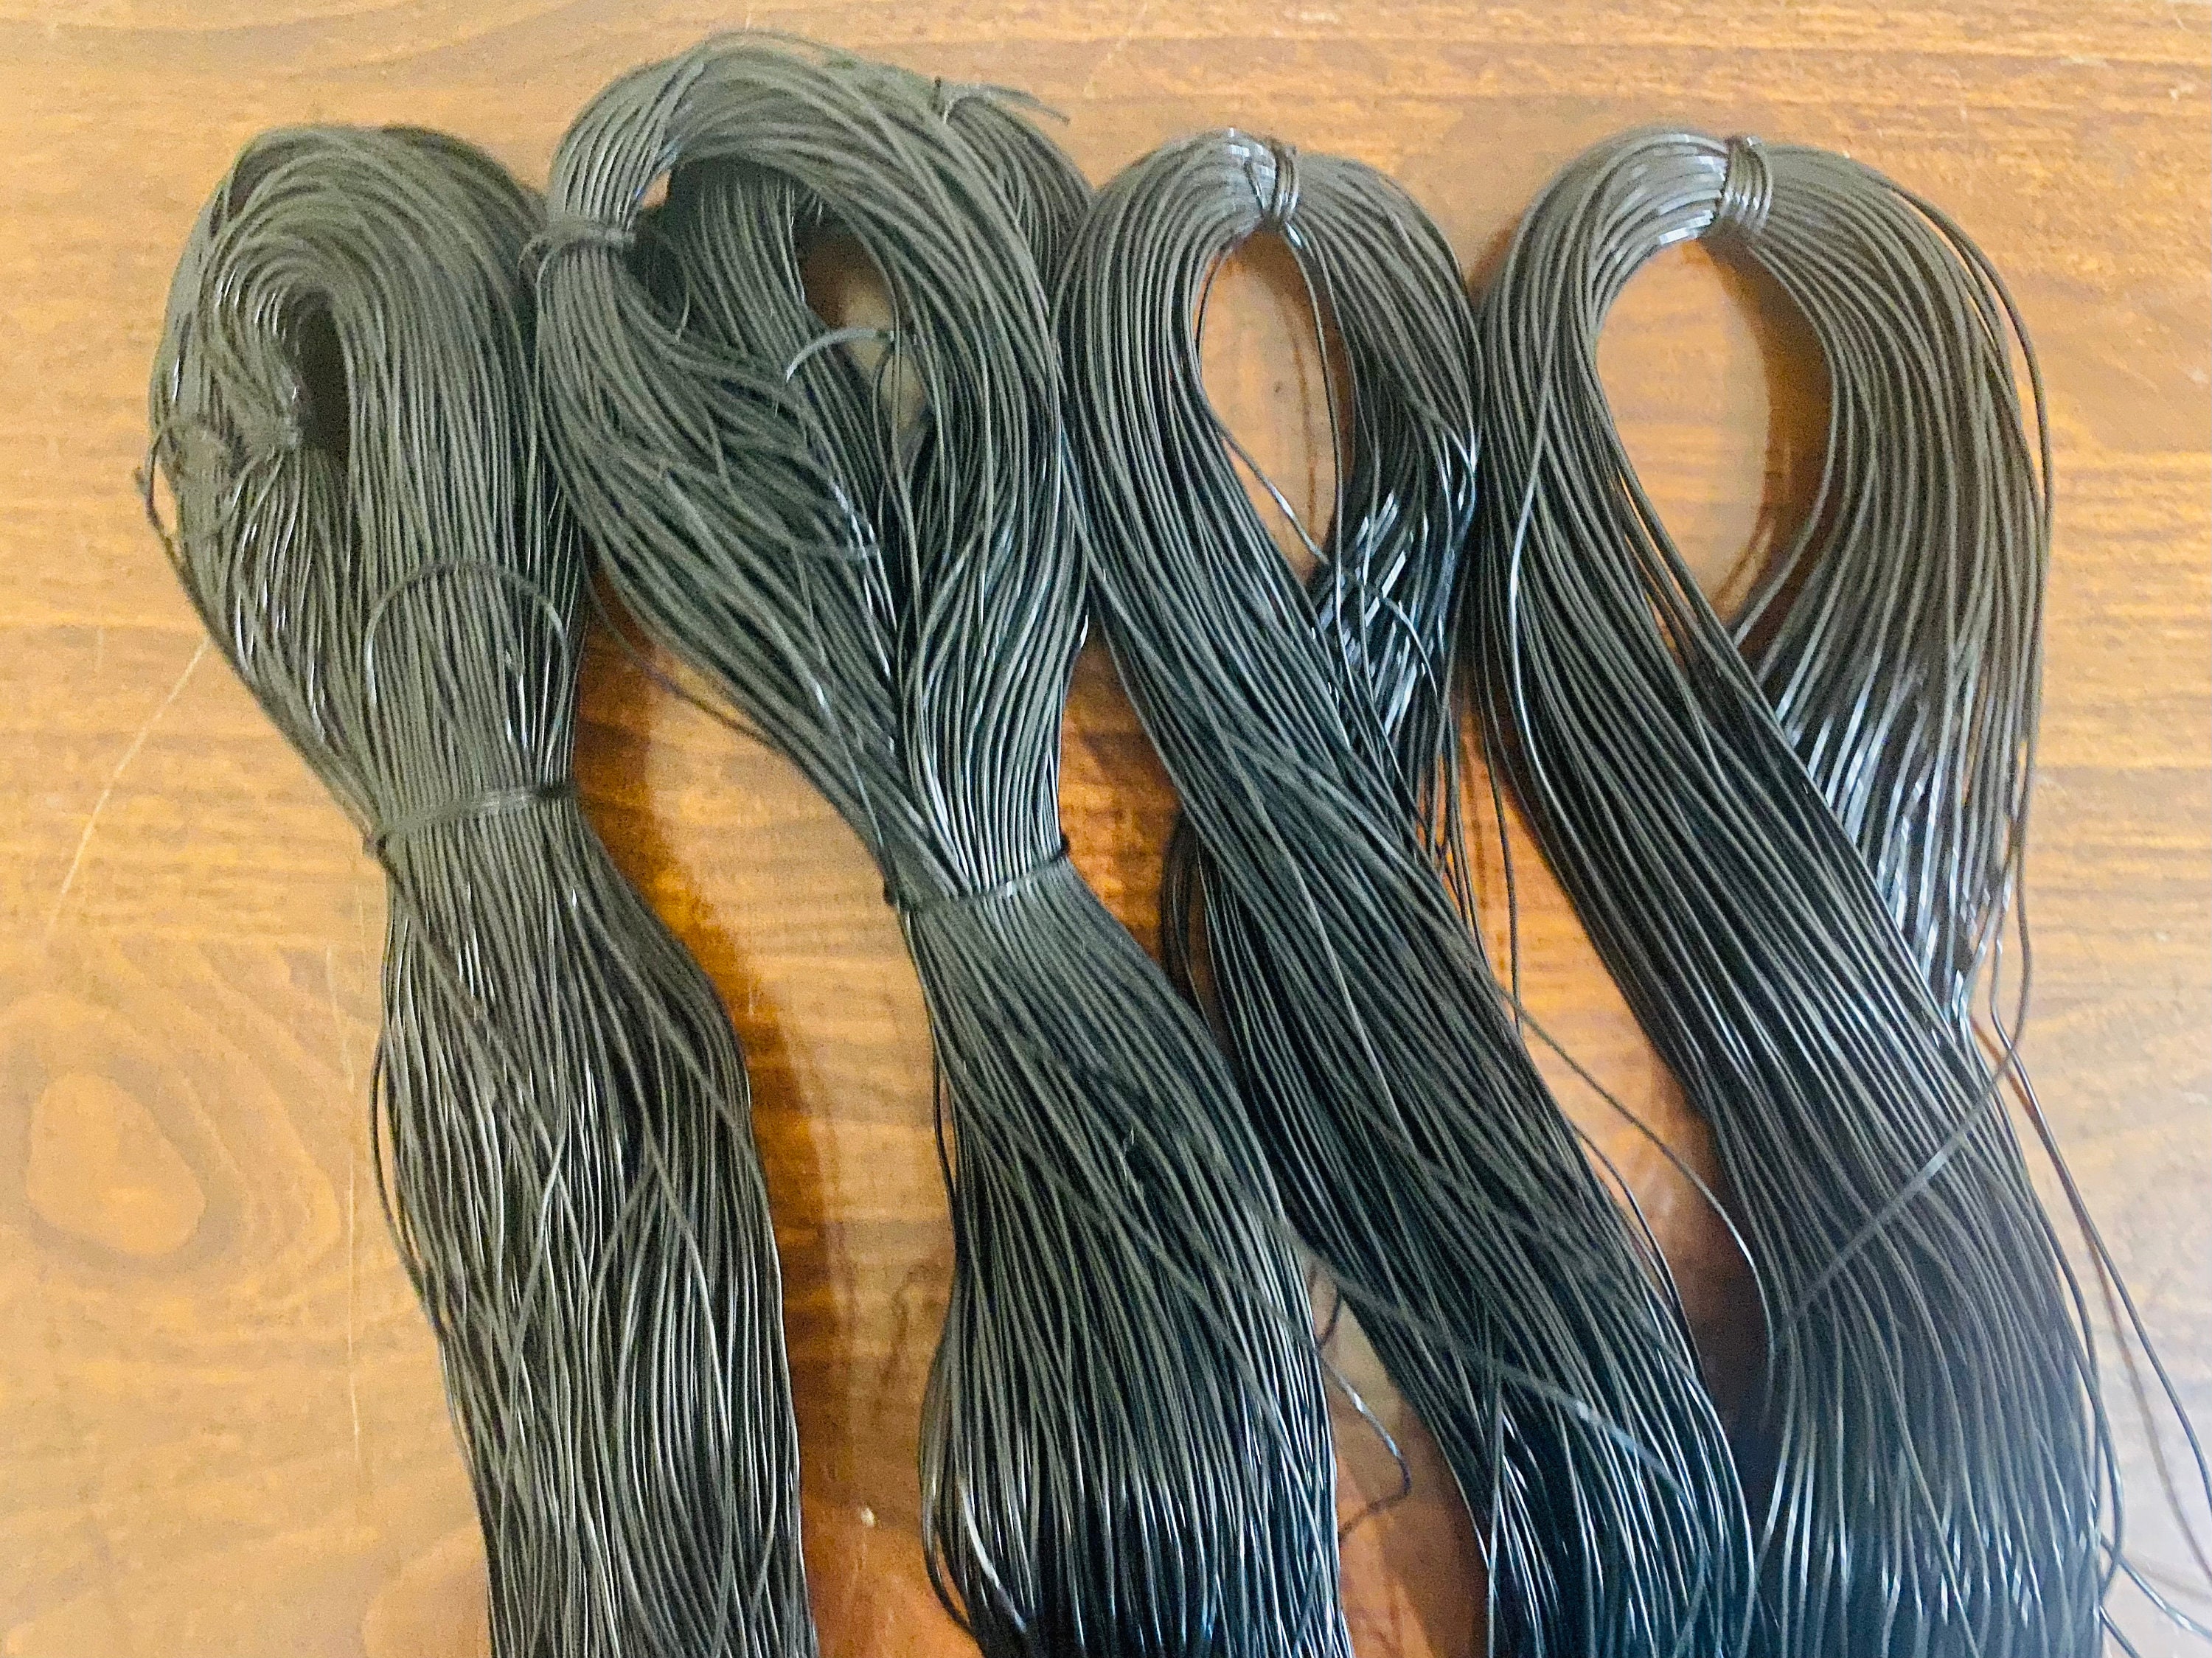 30ft 1mm Braided Beading Thread, Chinese Knotting Cord, Macrame String,  Nylon Cord Pick A Color 